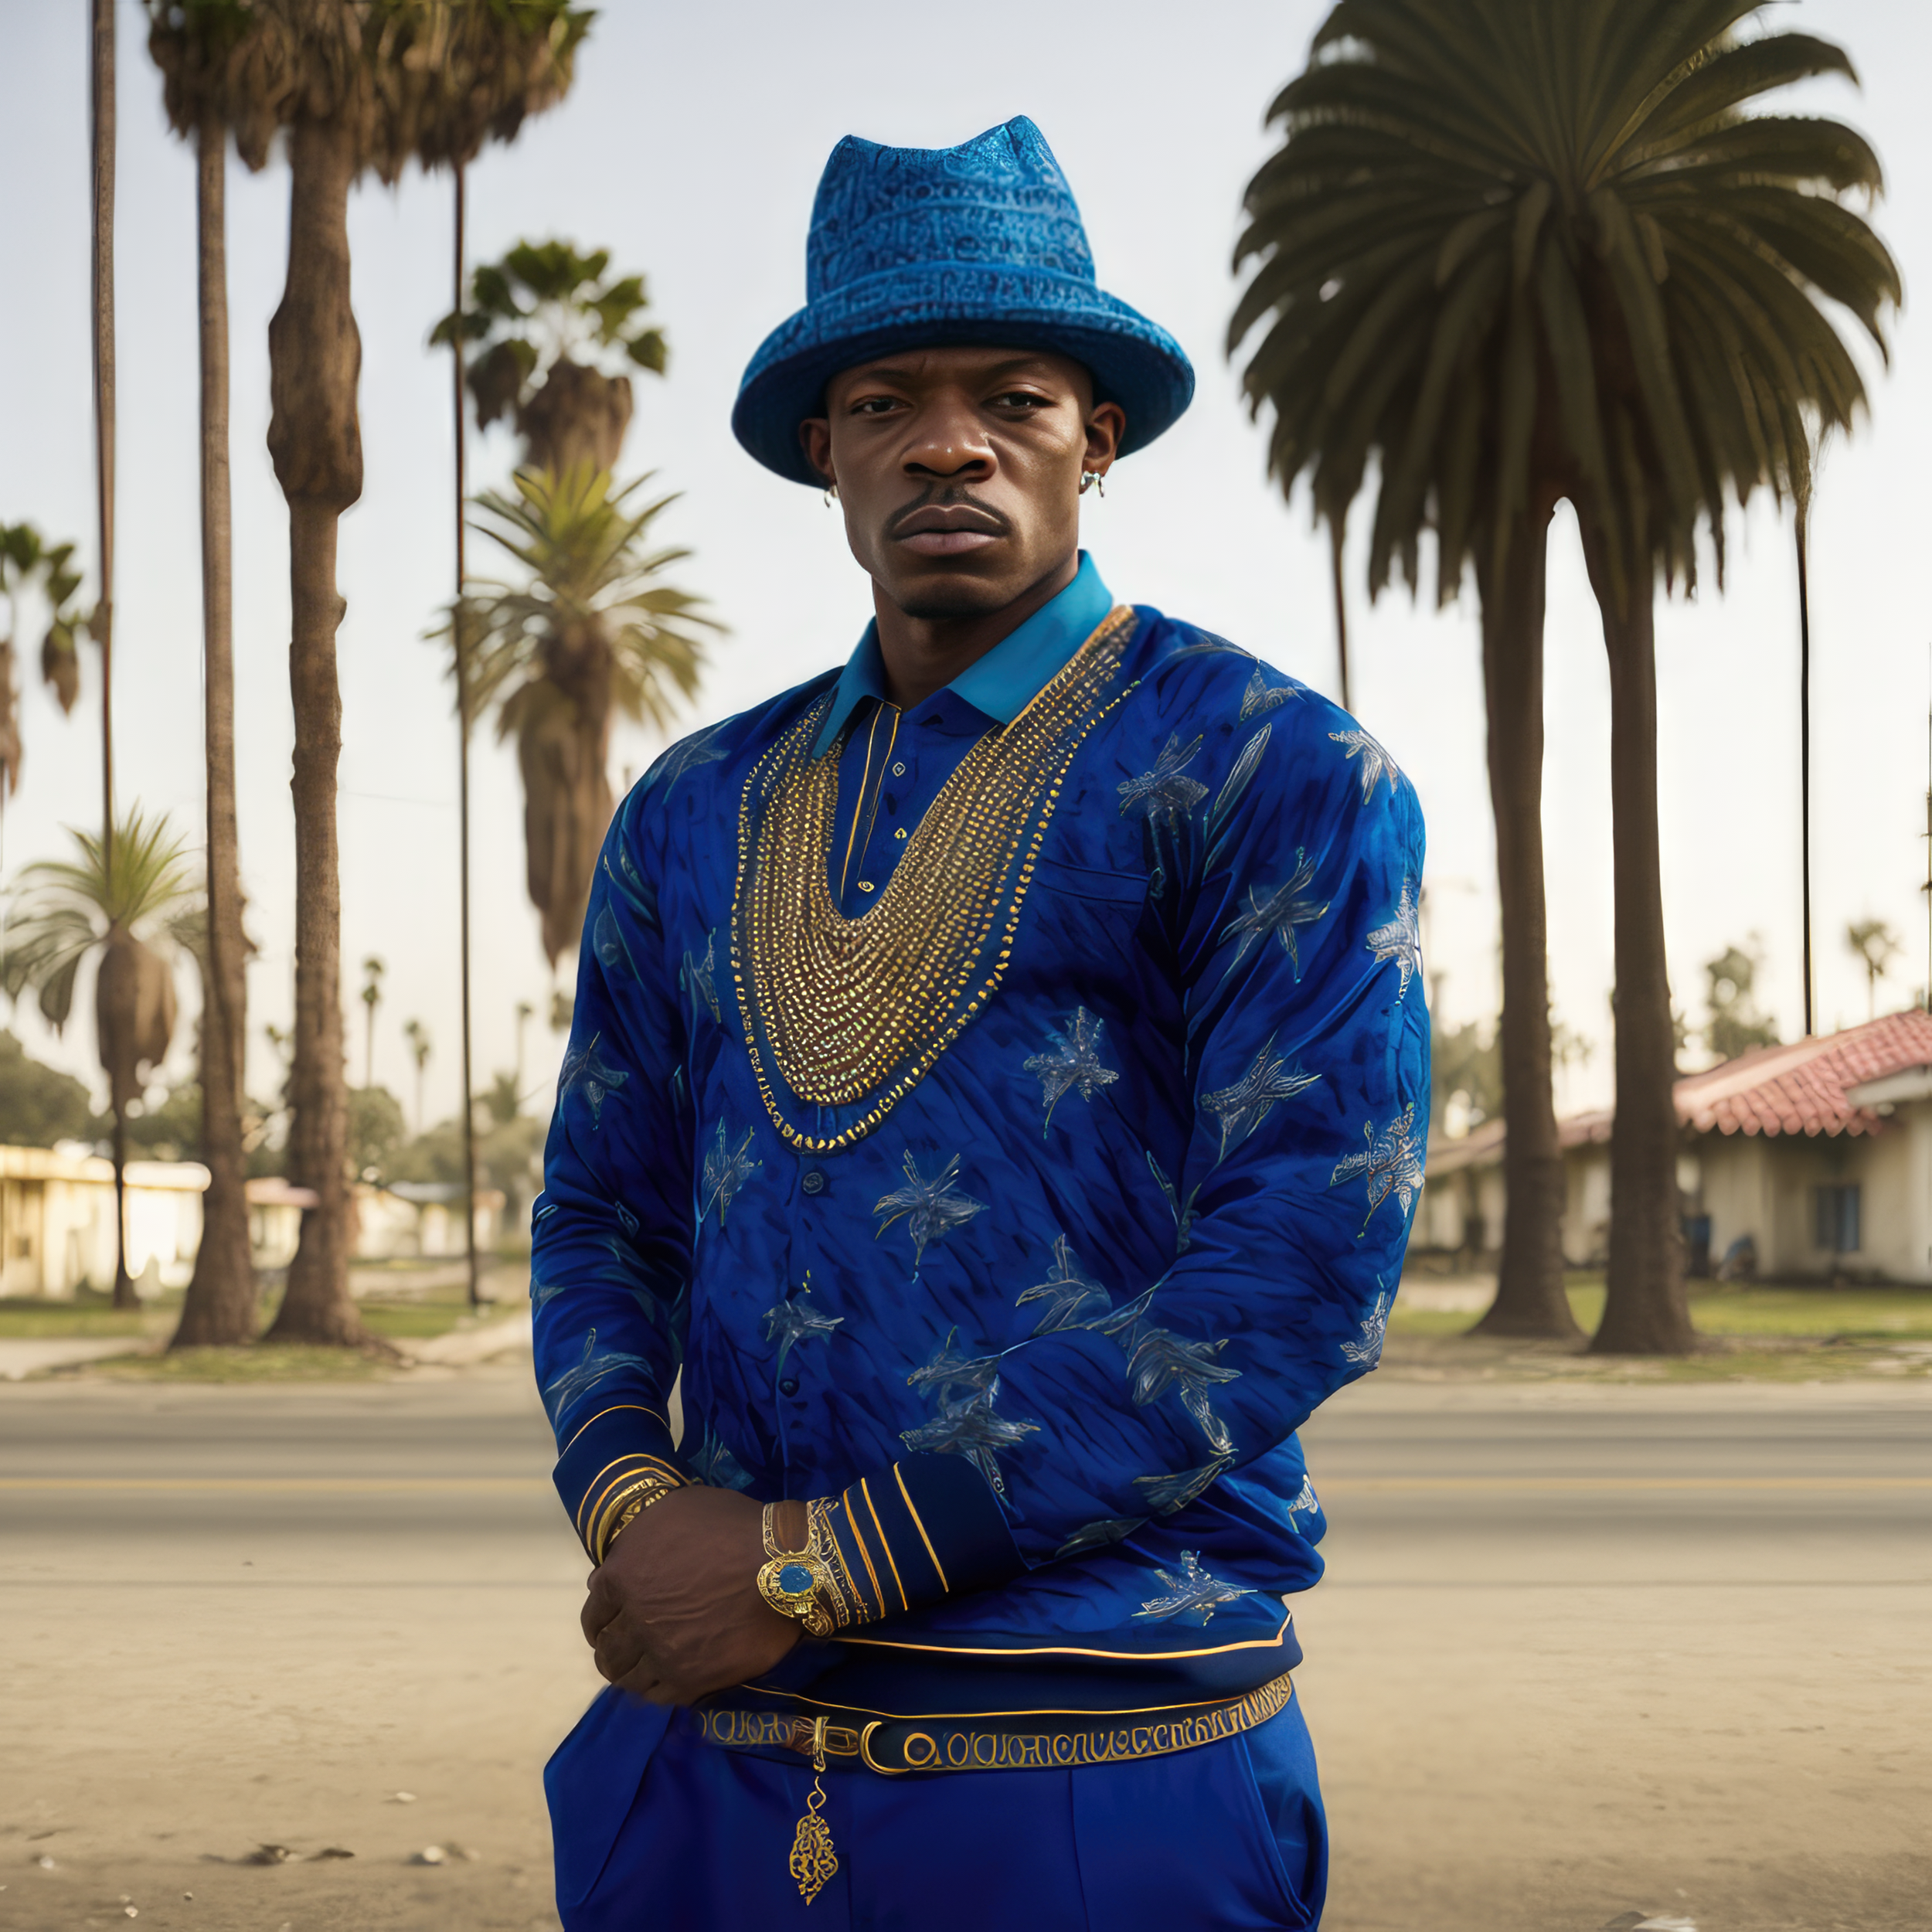 tonycncp_Photo_real_image_of_los_angeles_gangster_crip_standing_b6694736-72f7-4923-9596-69ab56e74629-gigapixel-standard-scale-6_00x.png